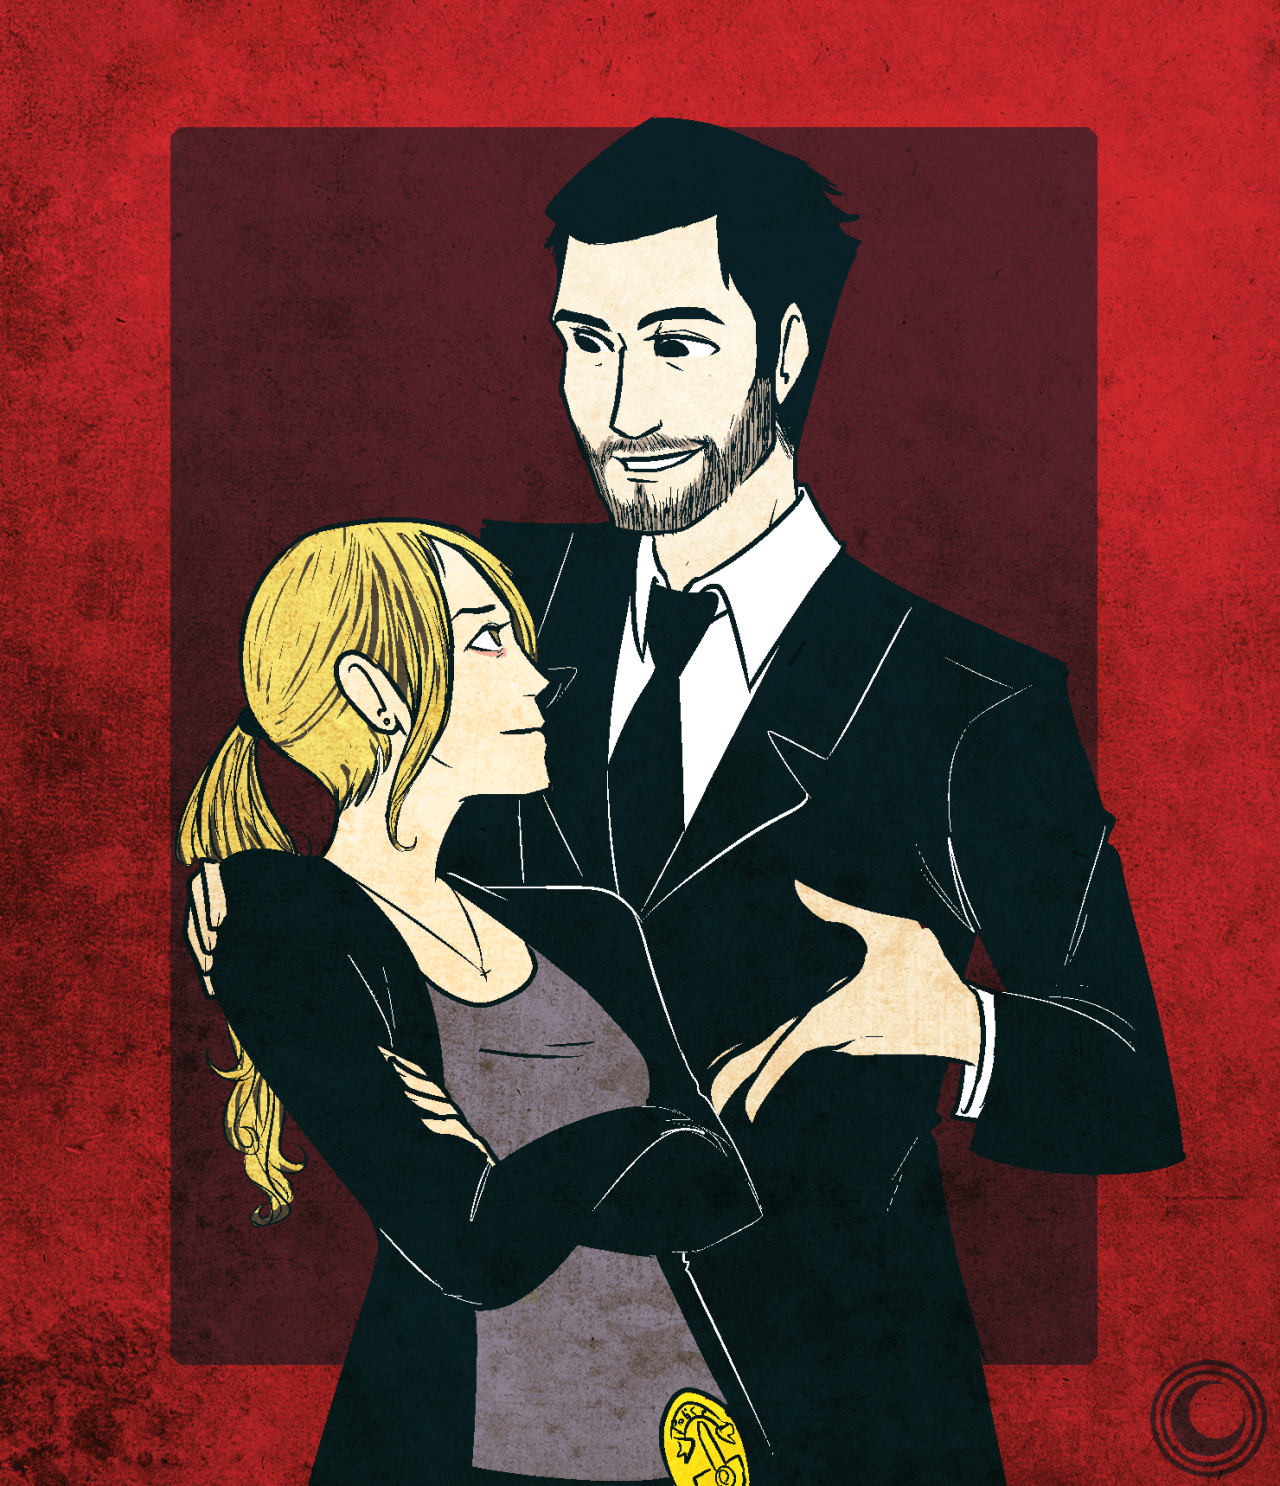 There Was A Lack Of Lucifer Deckerstar Fanart. So I Sought To Fix